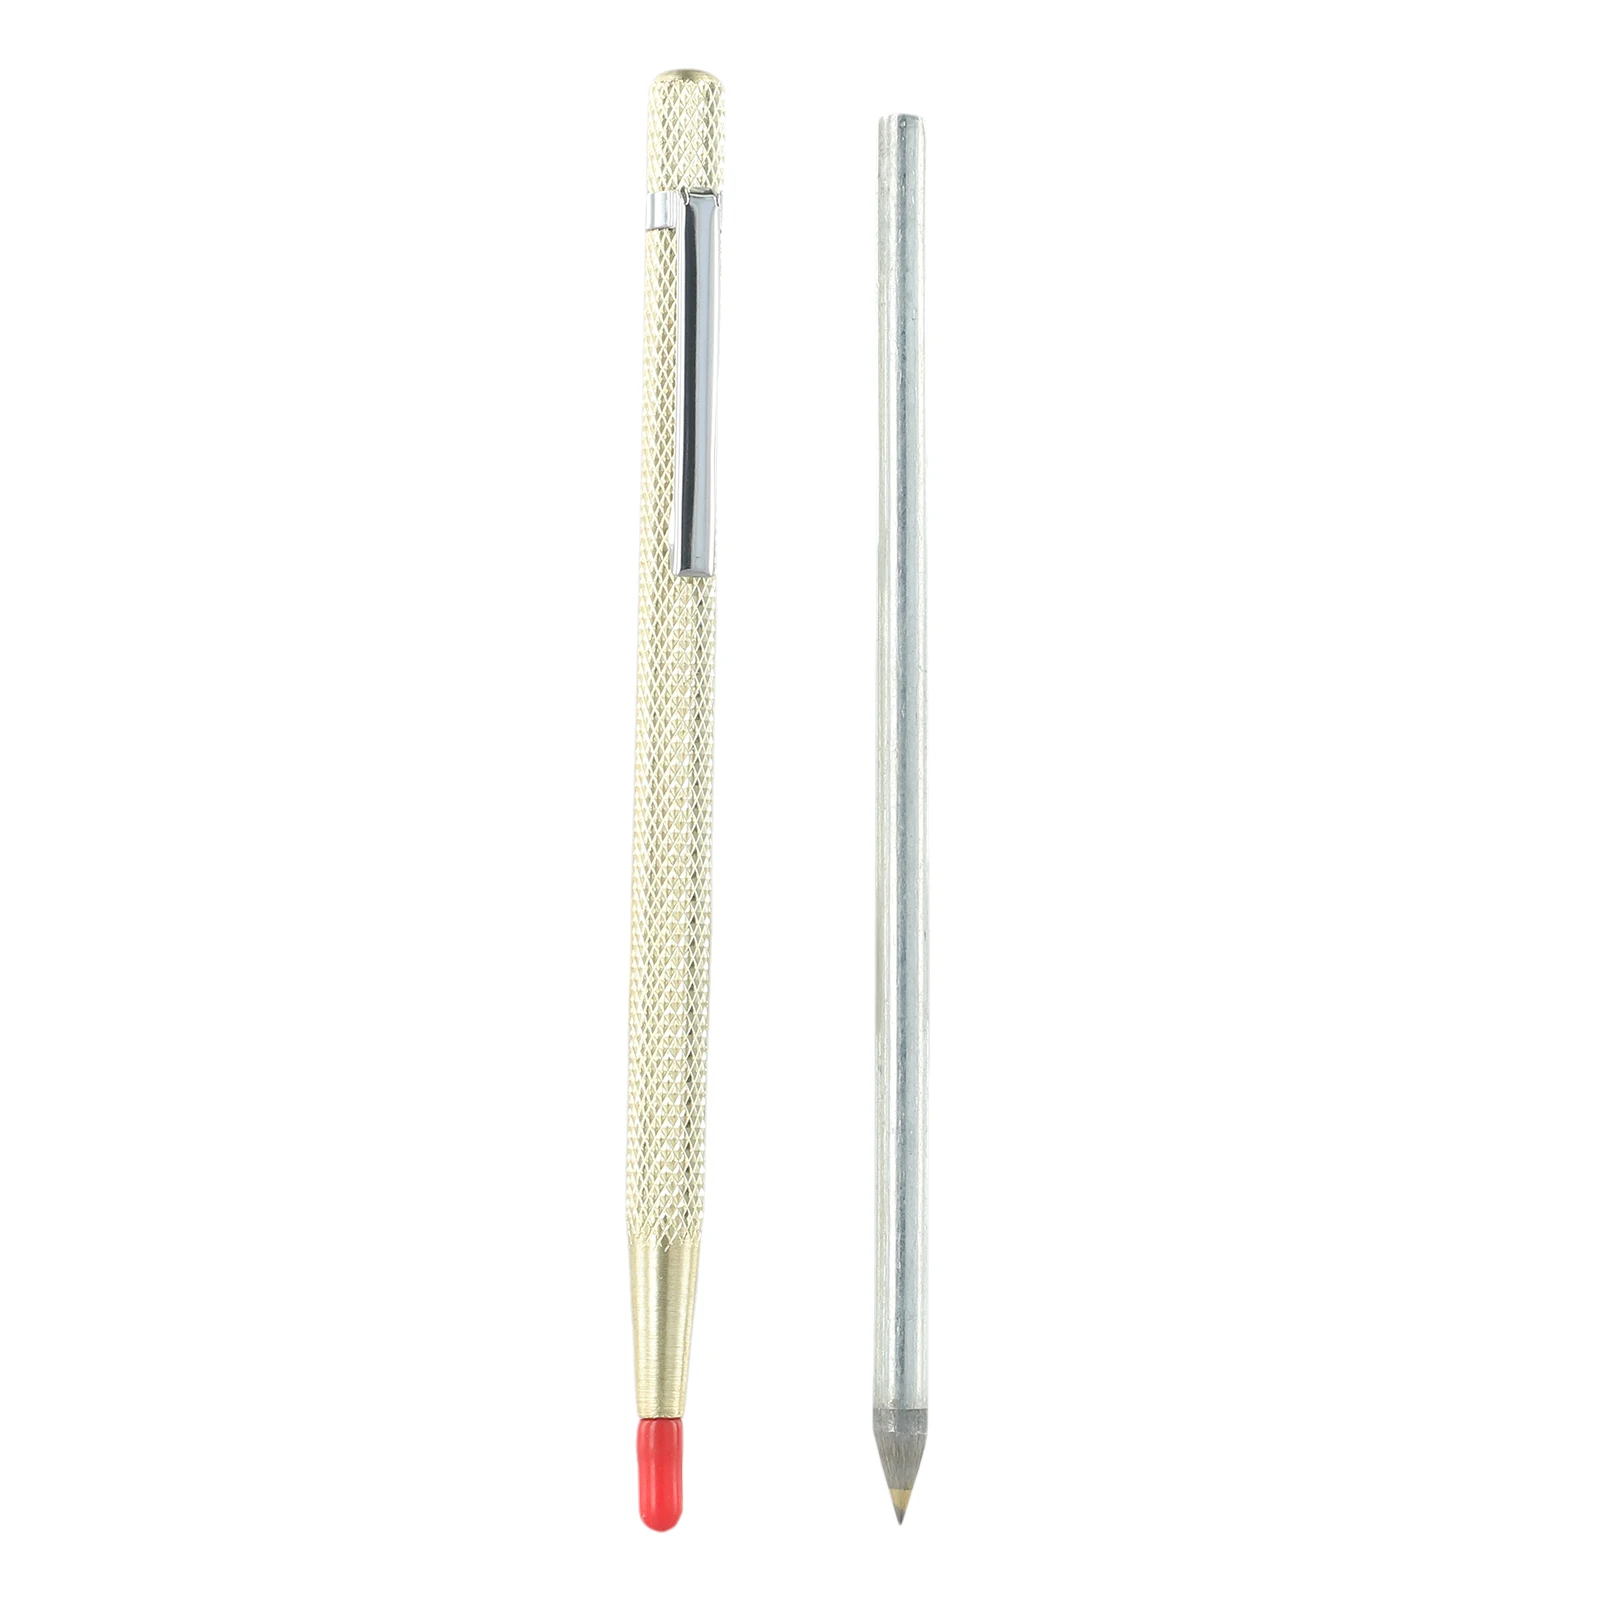 

Scriber Glass Tile Cutter Accessories Parts Replacement 2PCS Diamond Engraving Pen Gold And Silver Carbide Scriber